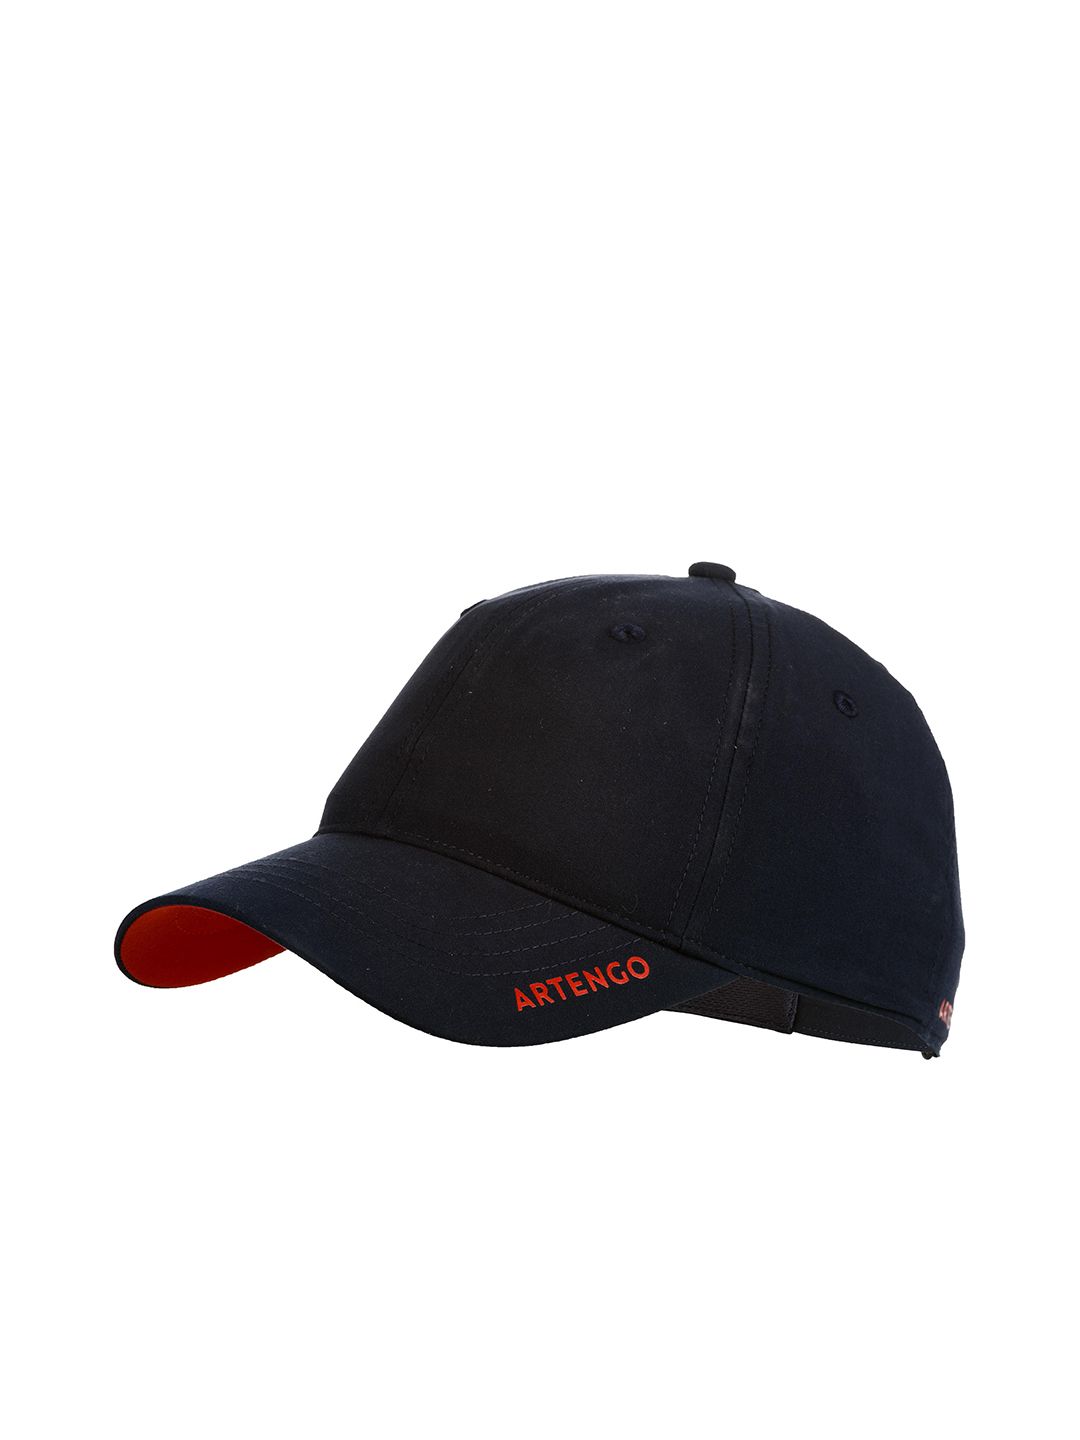 Artengo By Decathlon Unisex Navy Blue & Red Solid Baseball Cap Price in India